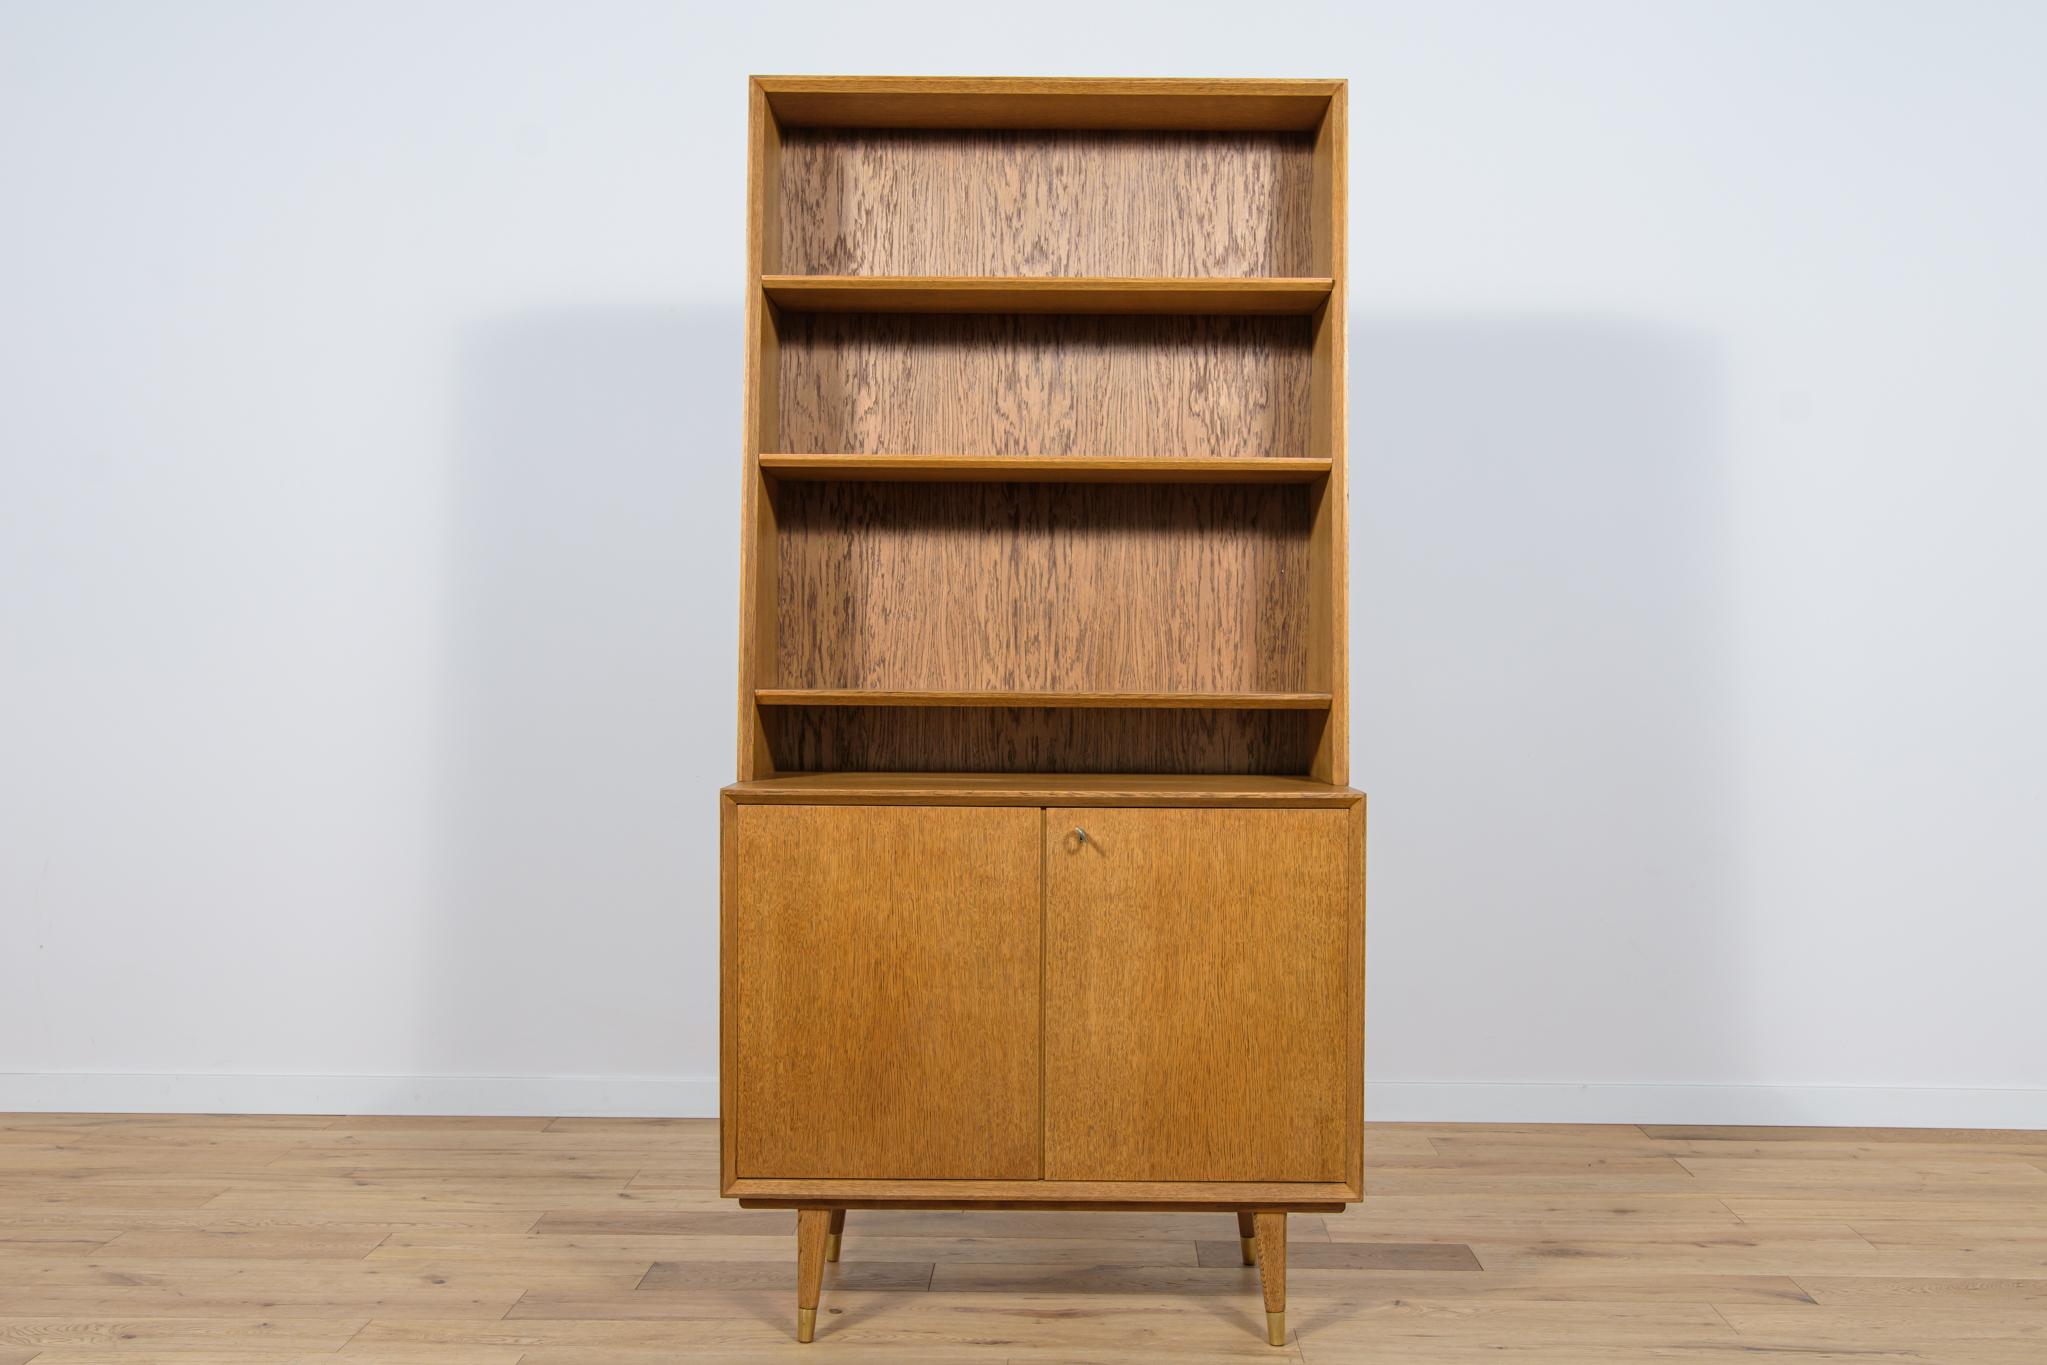 
This mid century shelf in oak was manufactured in the Sweden the 1970s. In the upper part there are four open shelves, in the lower part there is a cabinet with two shelves and two drawers. The furniture has metal leg fittings that have been